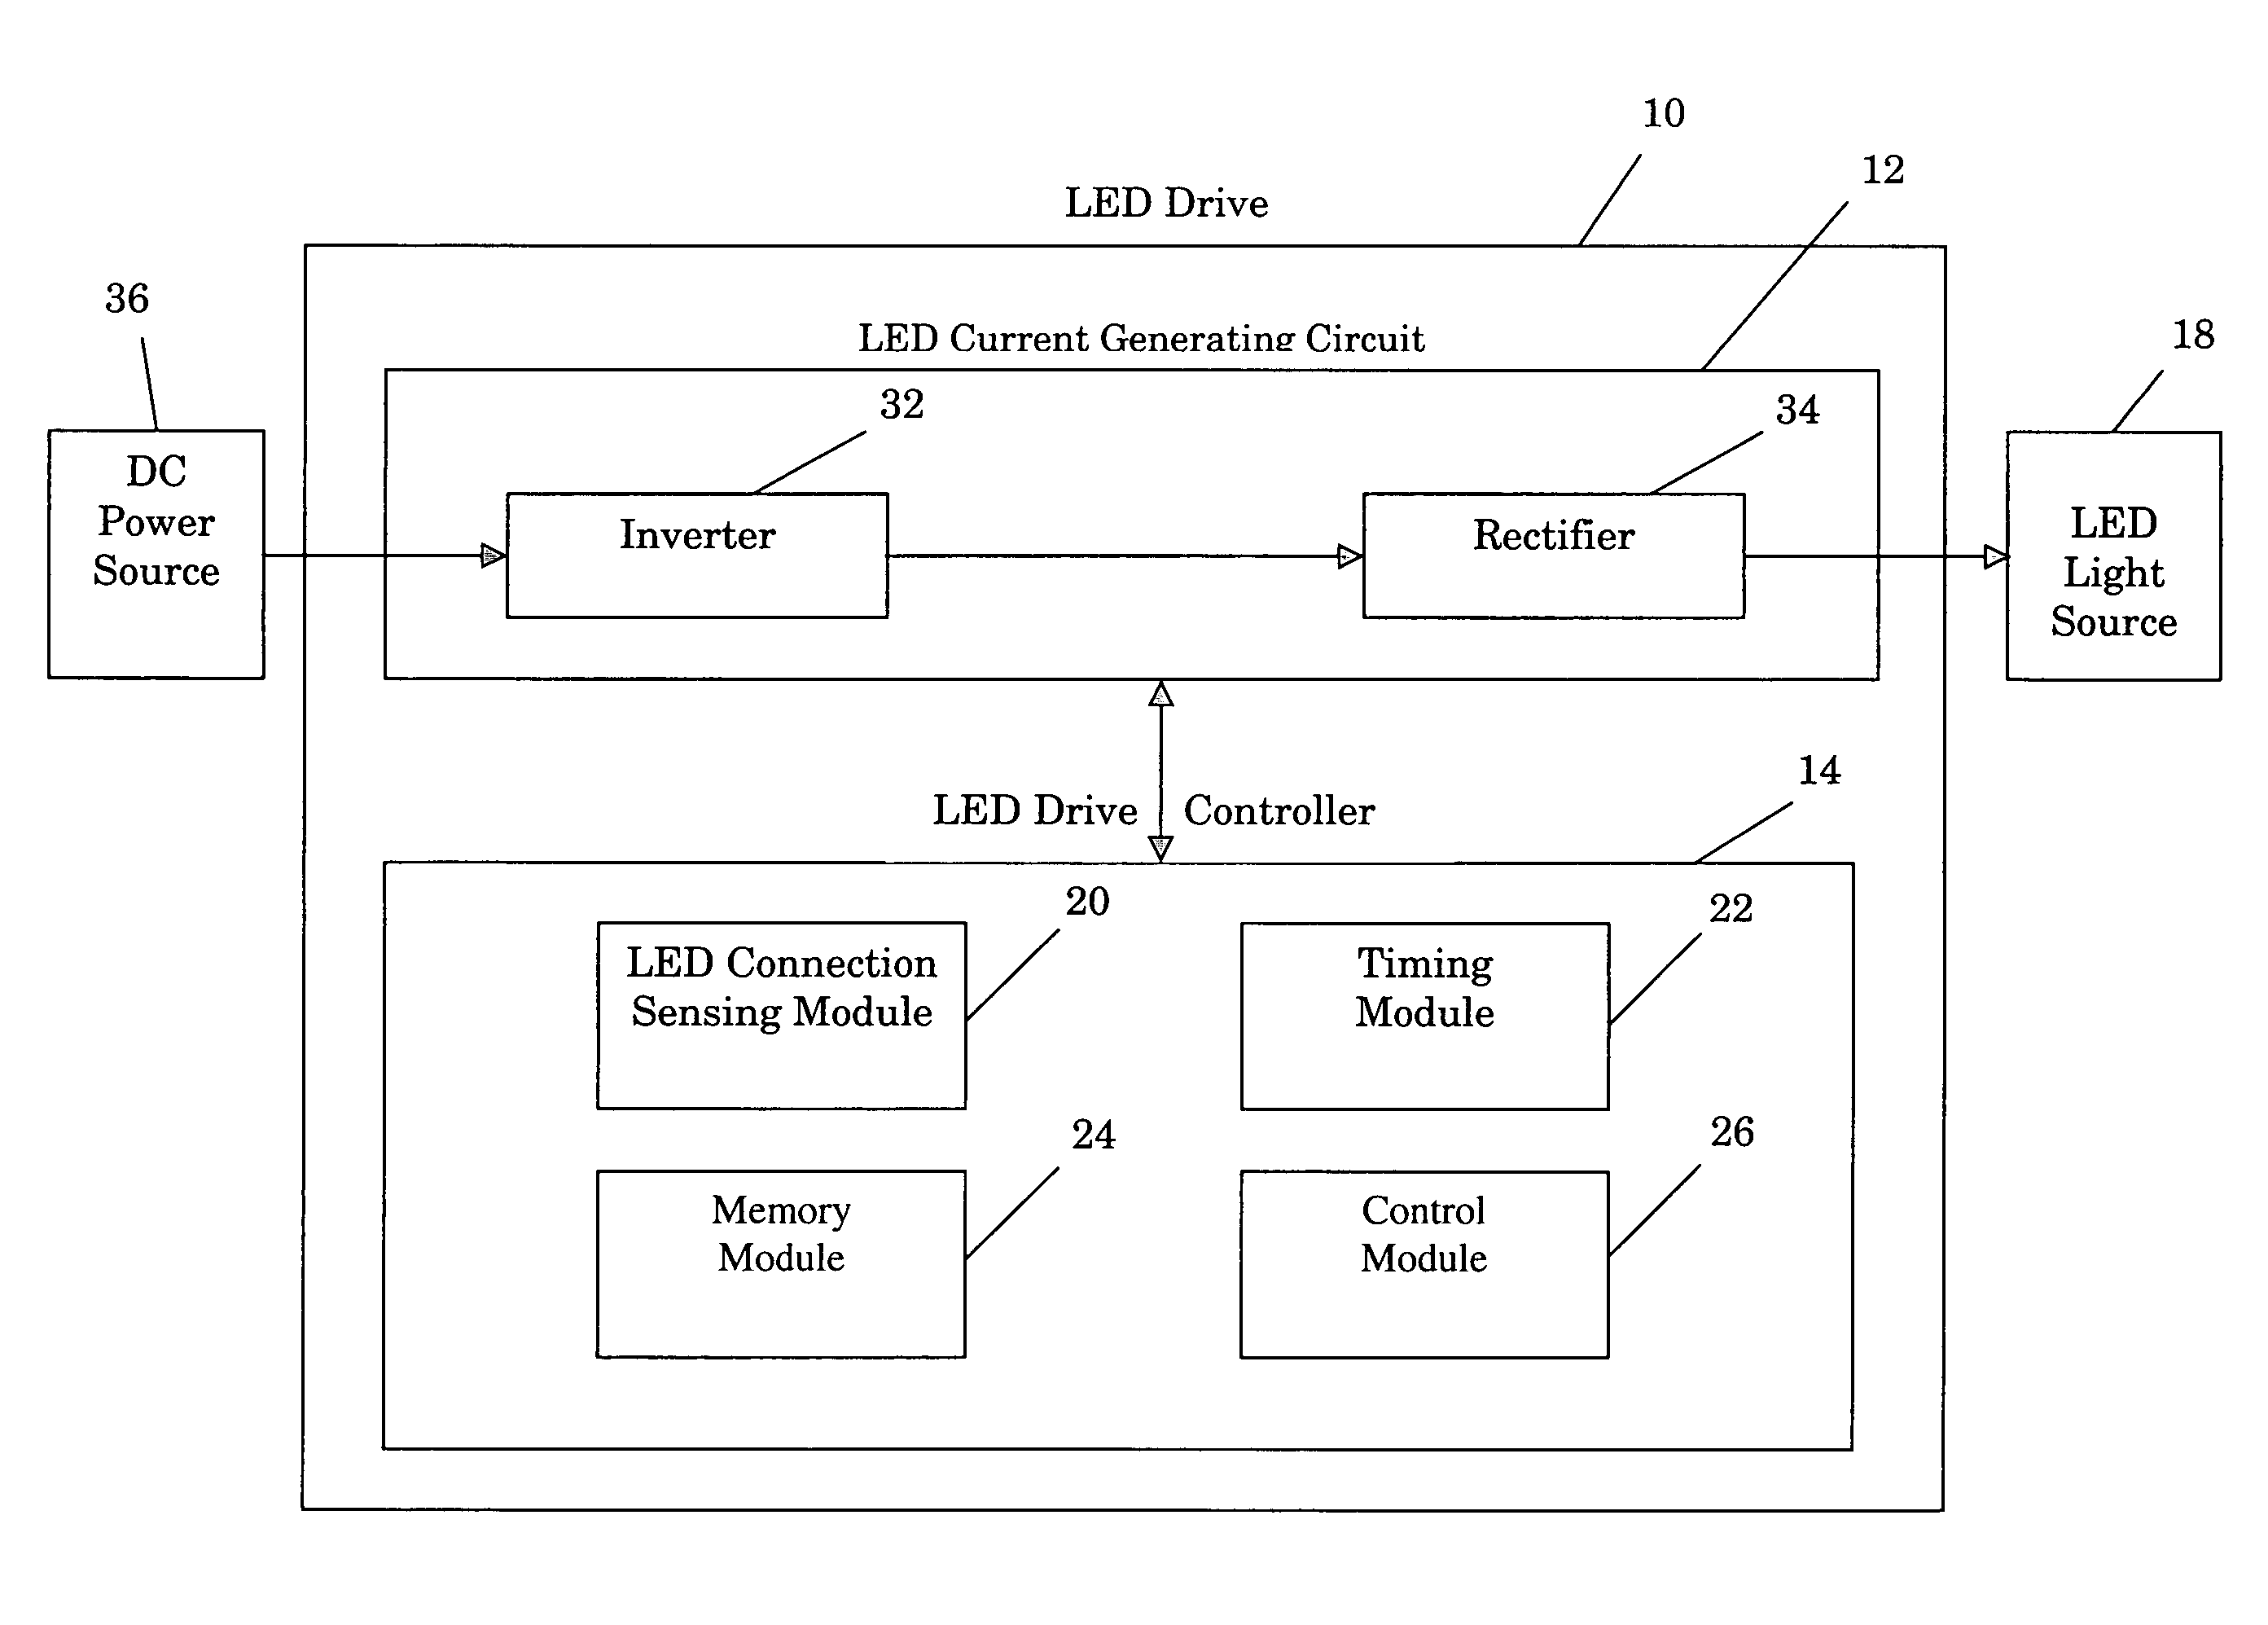 LED drive for generating constant light output